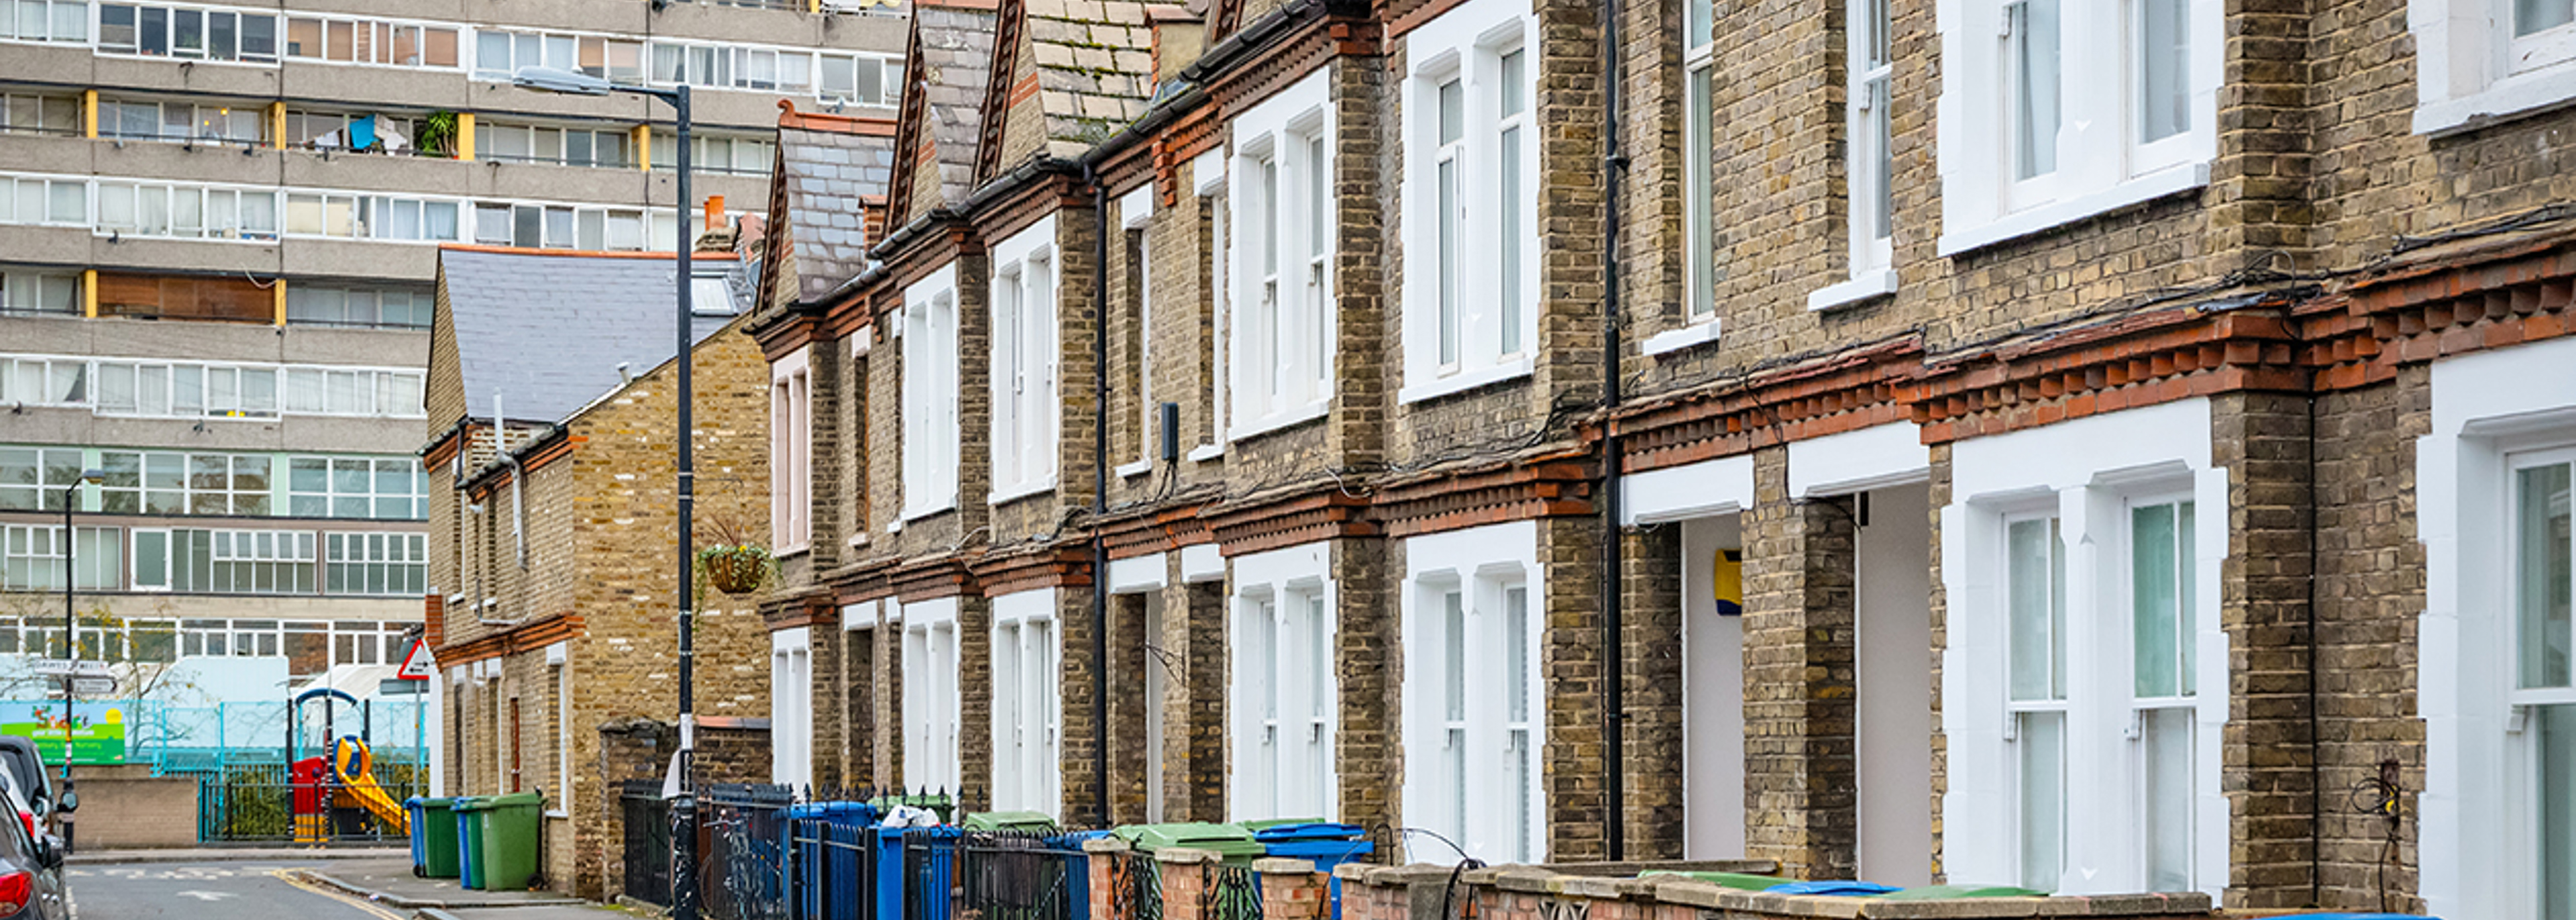 Poor quality housing costs NHS over £1bn a year